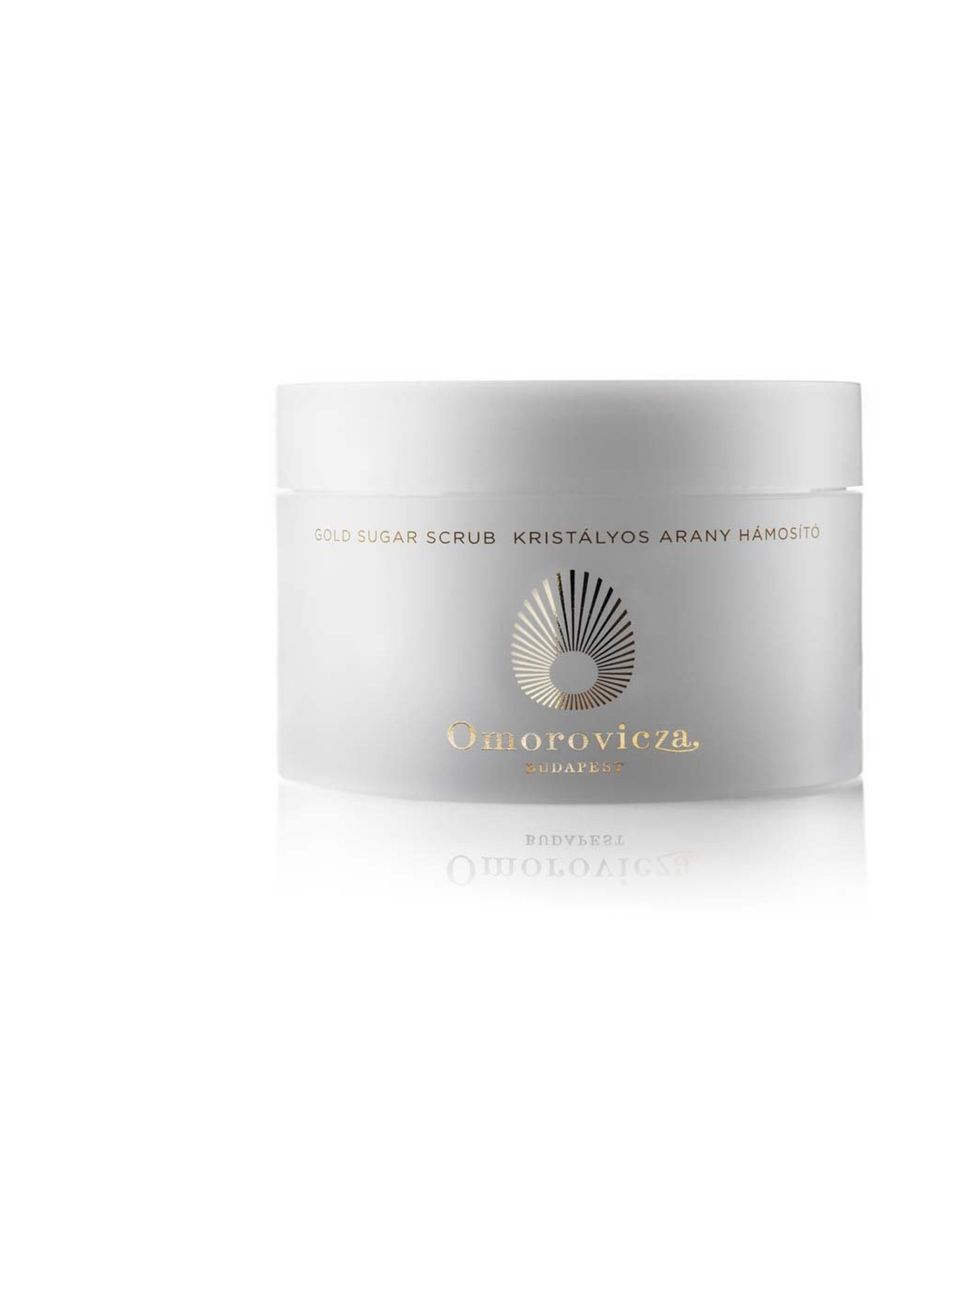 <p><a href="http://www.selfridges.com/en/Features-Gifts/Categories/Gifts-For-Occasions/Mothers-day-gifts/Spoil-her/Gold-sugar-scrub-200ml_475-3002745-13501/?cm_mmc=PLA-_-Google-_-PlusBox-_-Omorovicza&amp;_$ja=cgid:5189056654%7Ctsid:35948%7Ccid:116283454%7